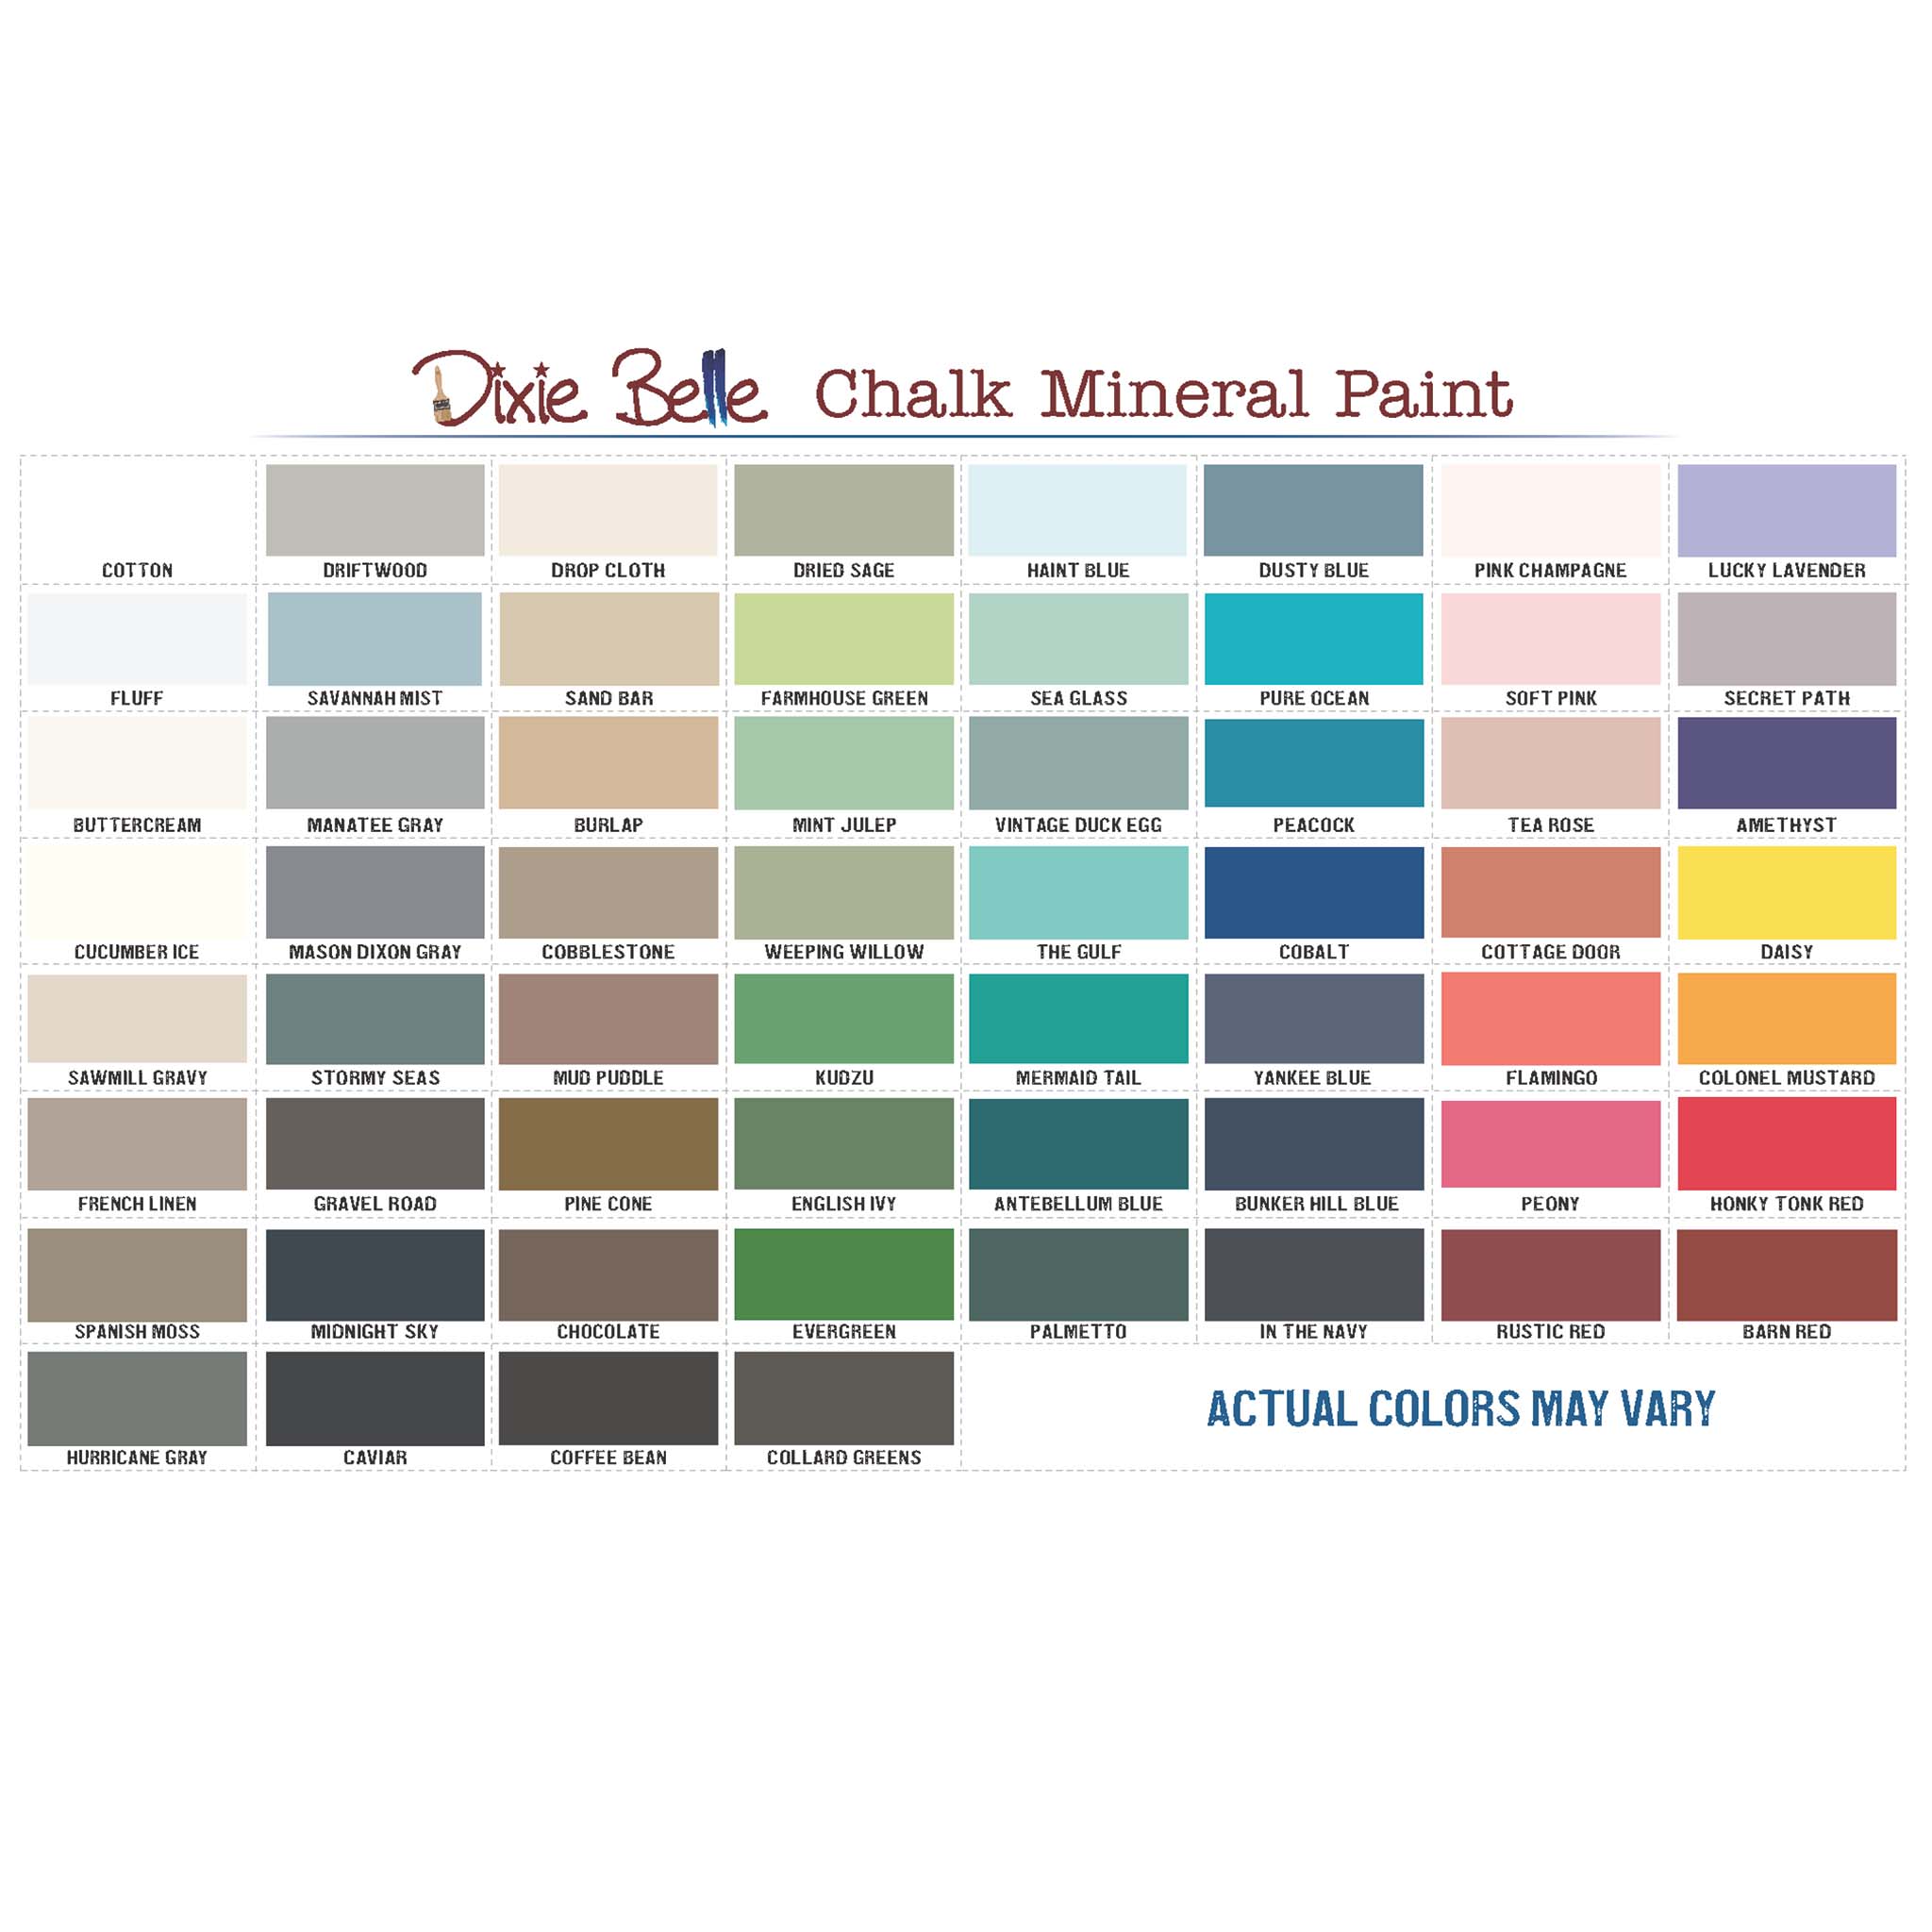 Dixie Belle Paint’s Chalk Mineral Paint chart is against a white background. 7 rows of 8 colors and 1 row of 4 colors create a total of 60 paint colors on this chart. Actual colors may vary.